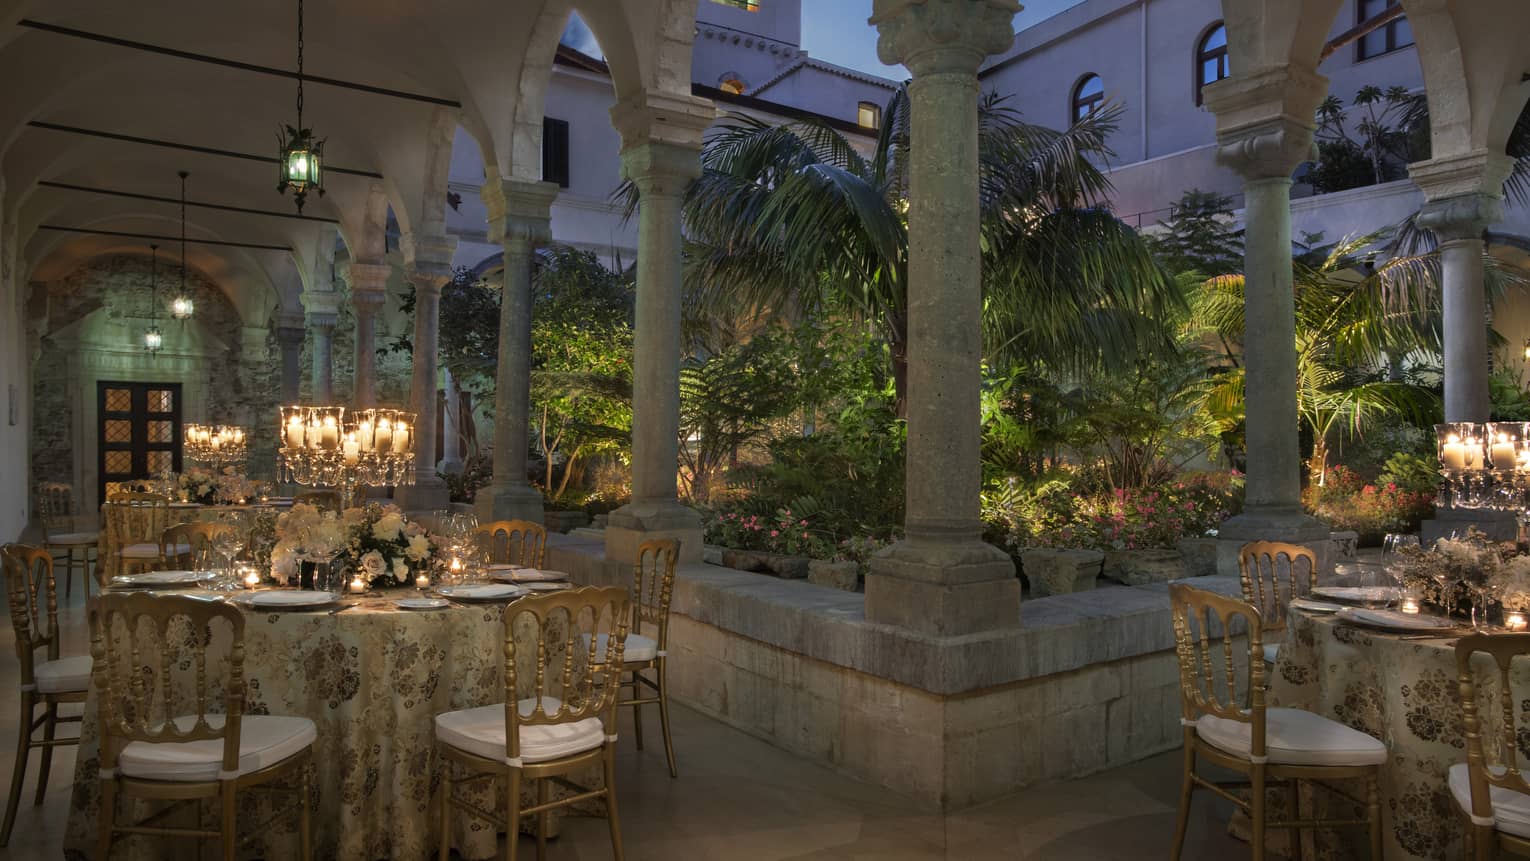 Ancient Cloister outdoor venue with elegant table settings under stone archway at dusk